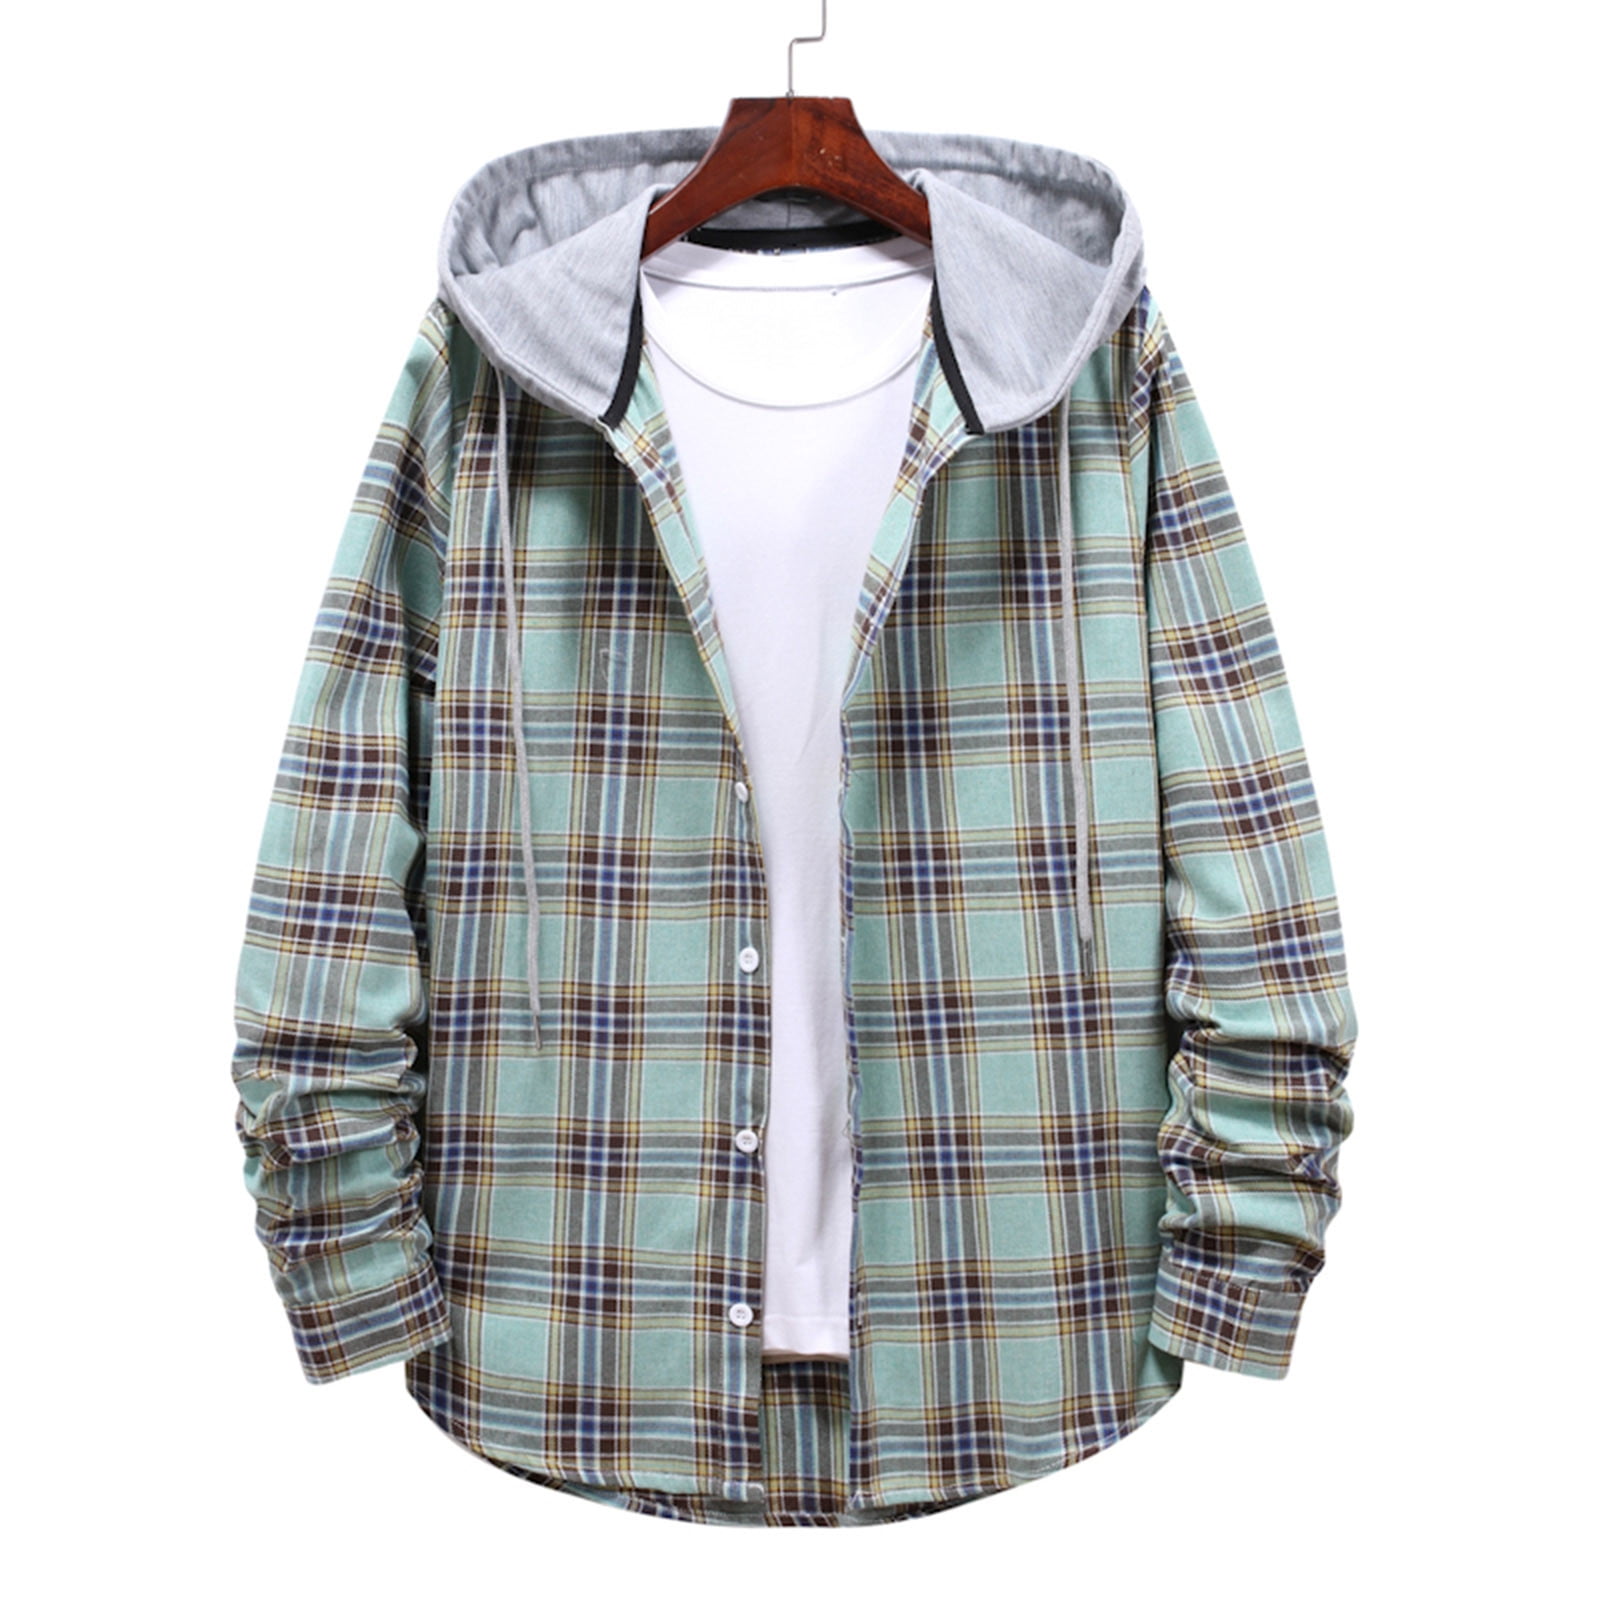 XFLWAM Men's Flannel Hoodie Plaid Shirts Jacket Casual Long Sleeve Button  Down Lightweight Hooded Shirt Coffee S 